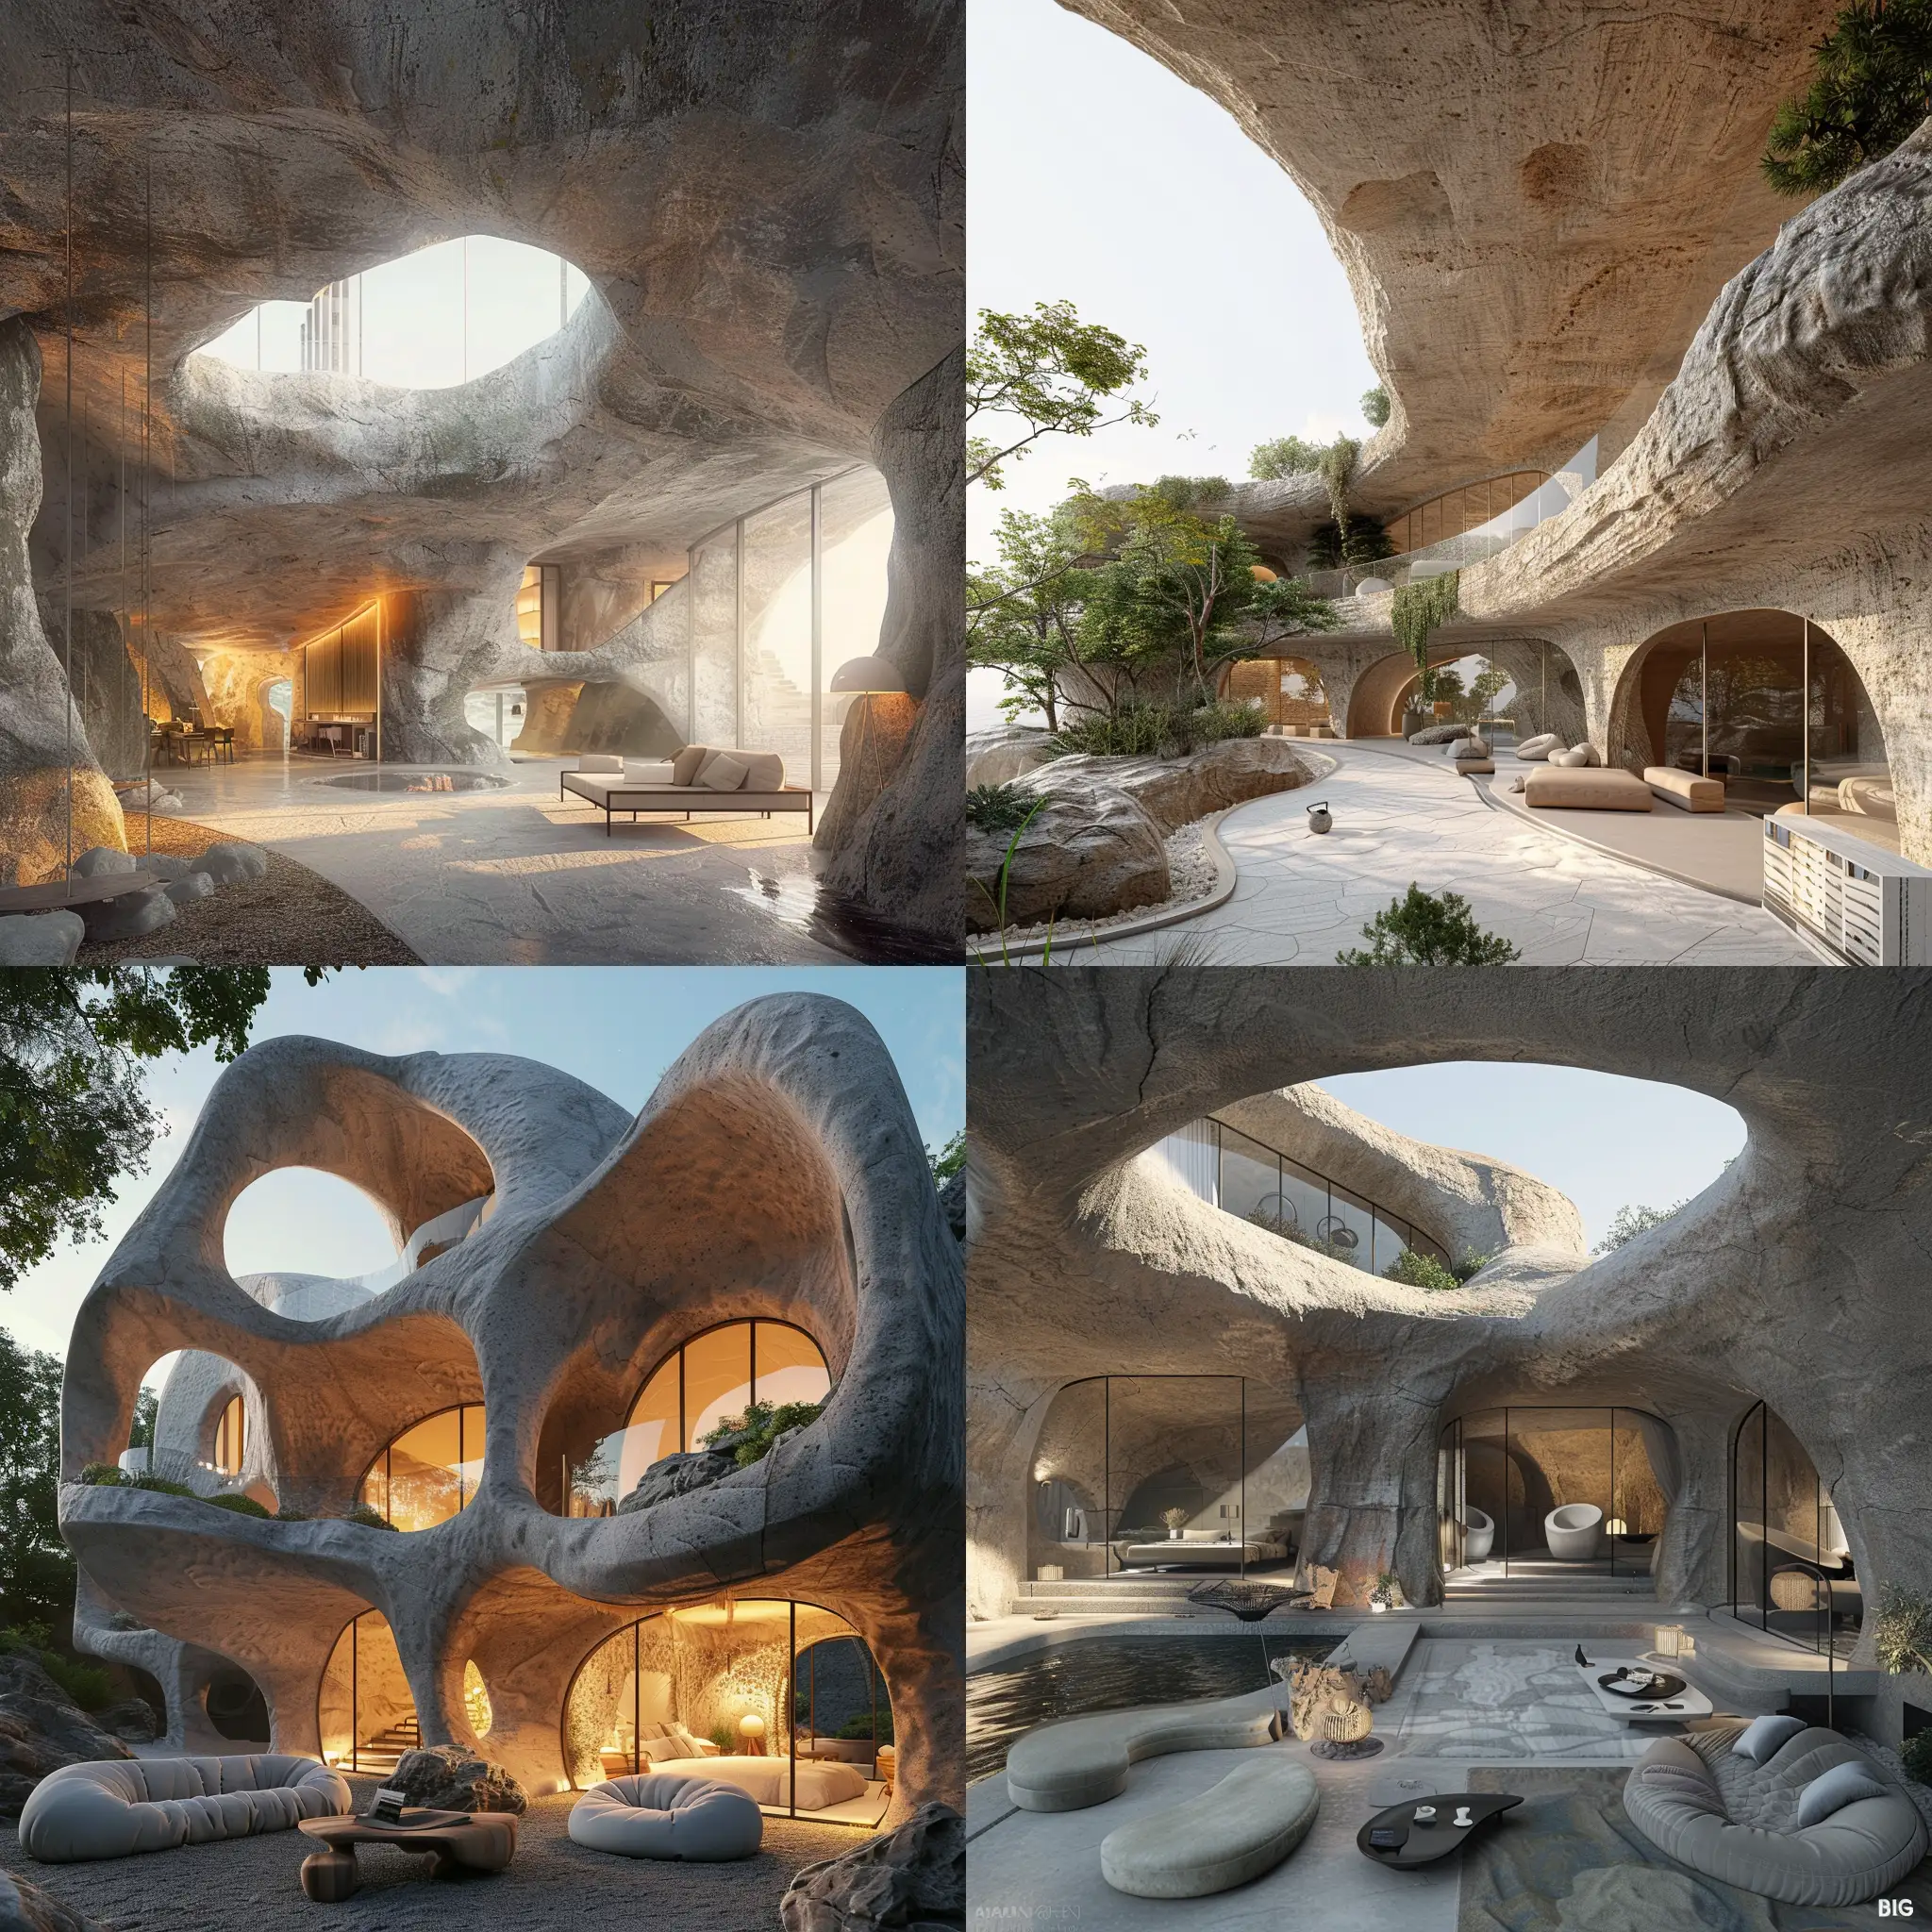 Modern-CaveStyle-Architectural-Design-Renderings-by-BIG-Firm